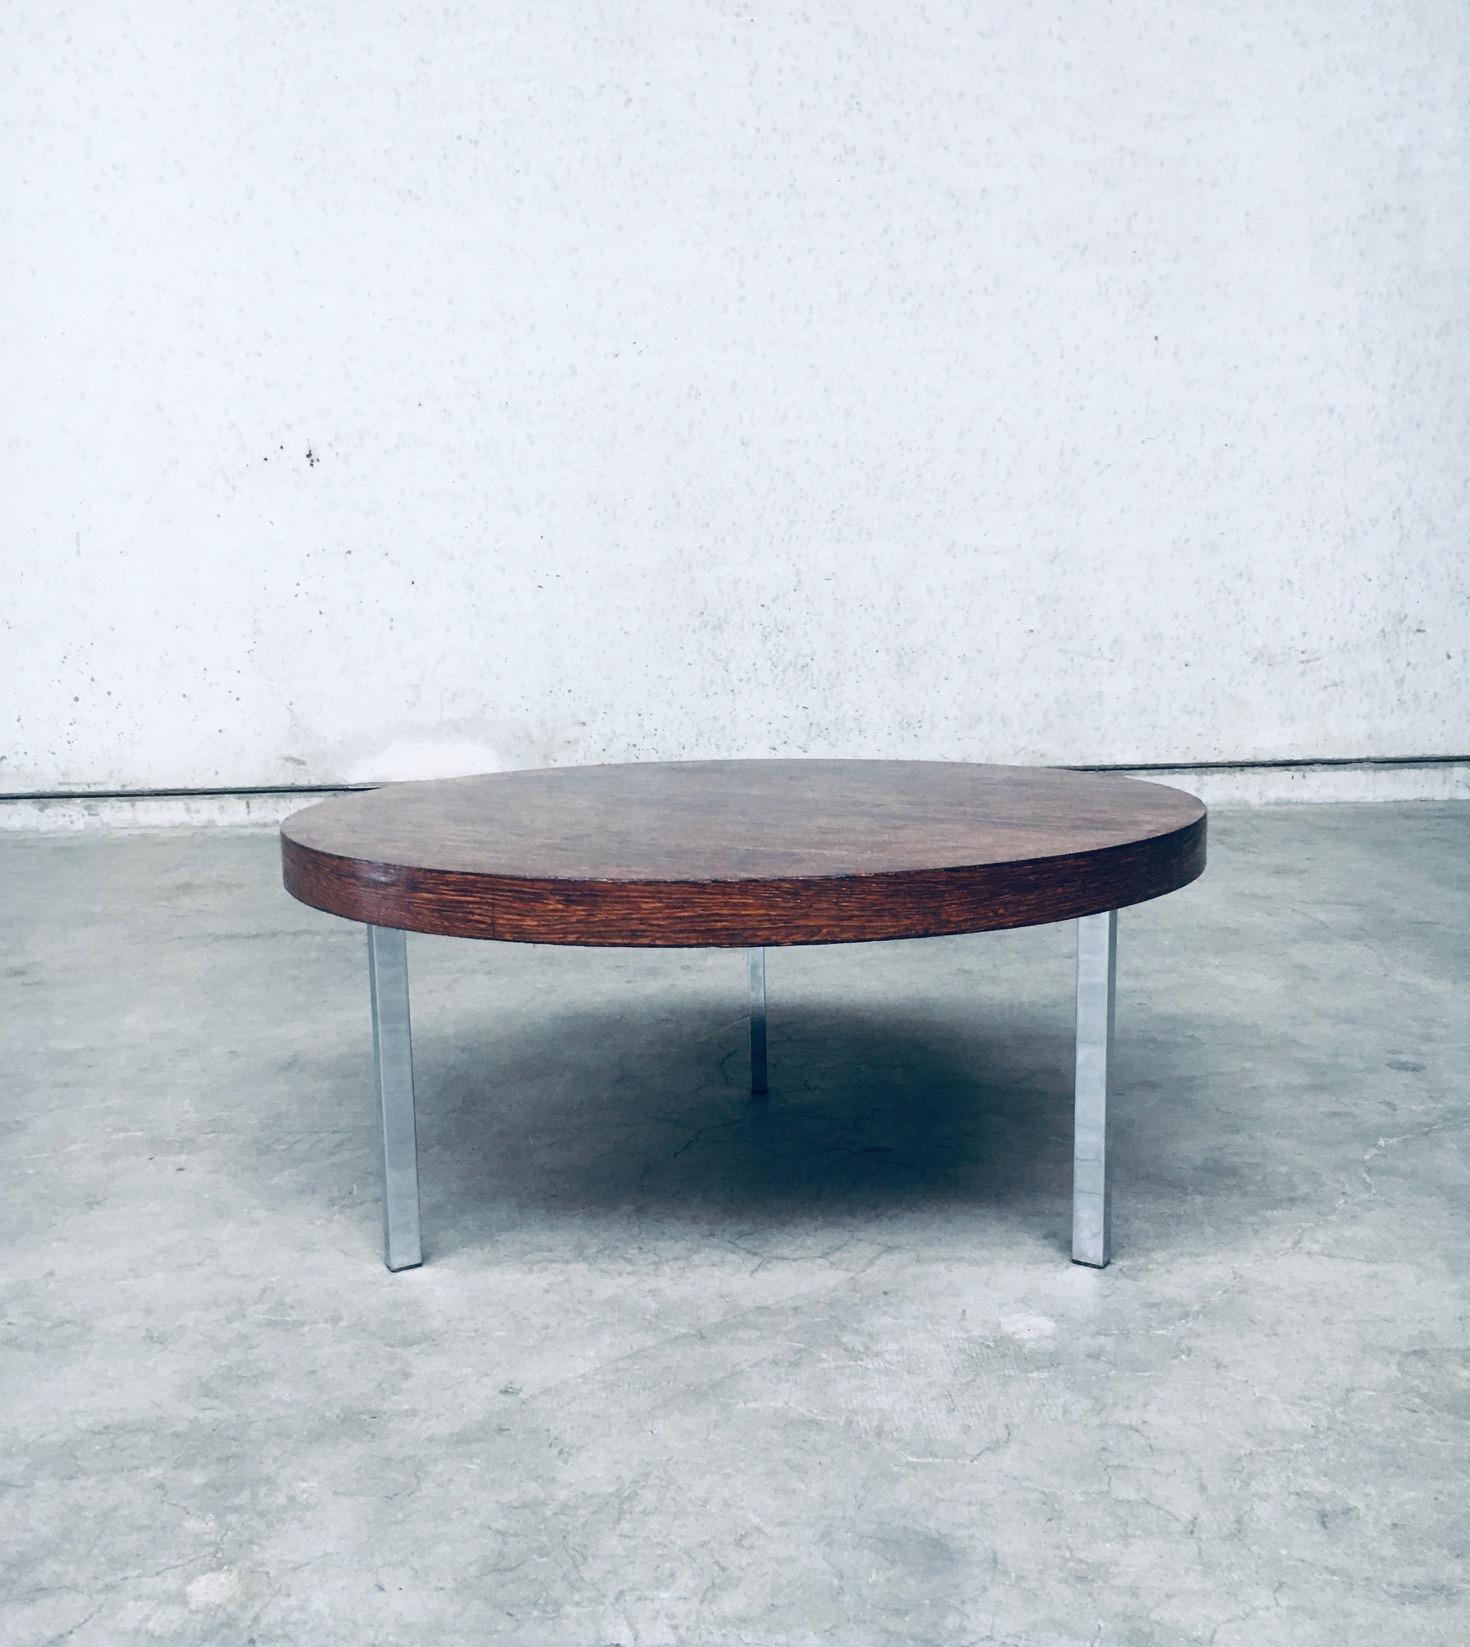 Midcentury Modern Dutch Design Tripod Coffee Table, Netherlands 1960's For Sale 1